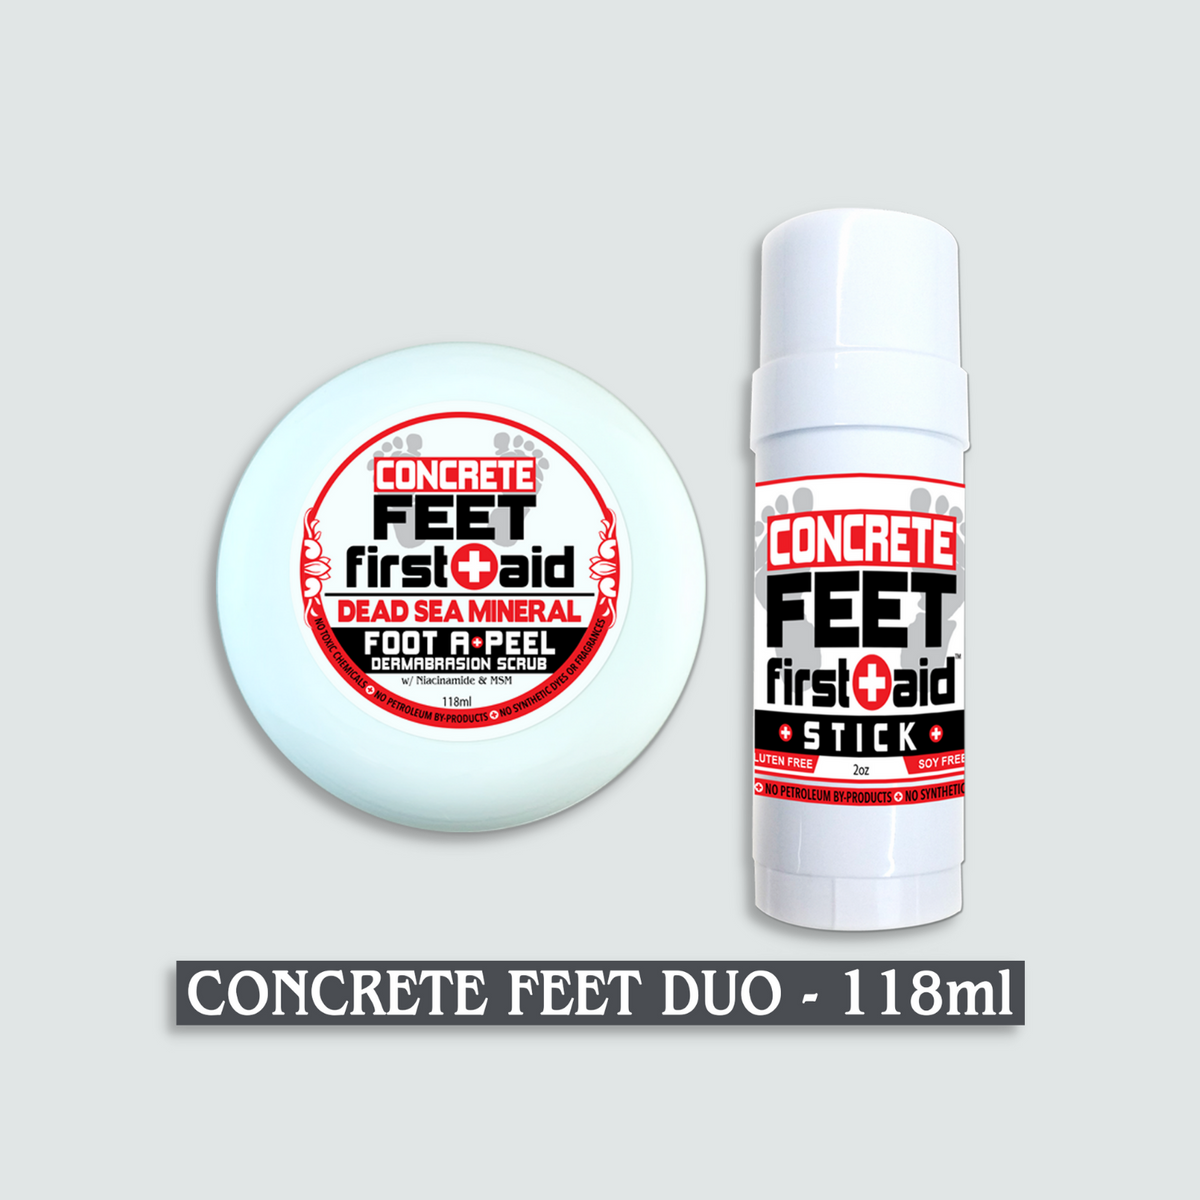 First aid stick and scrub for dry, crusty, cracked heels